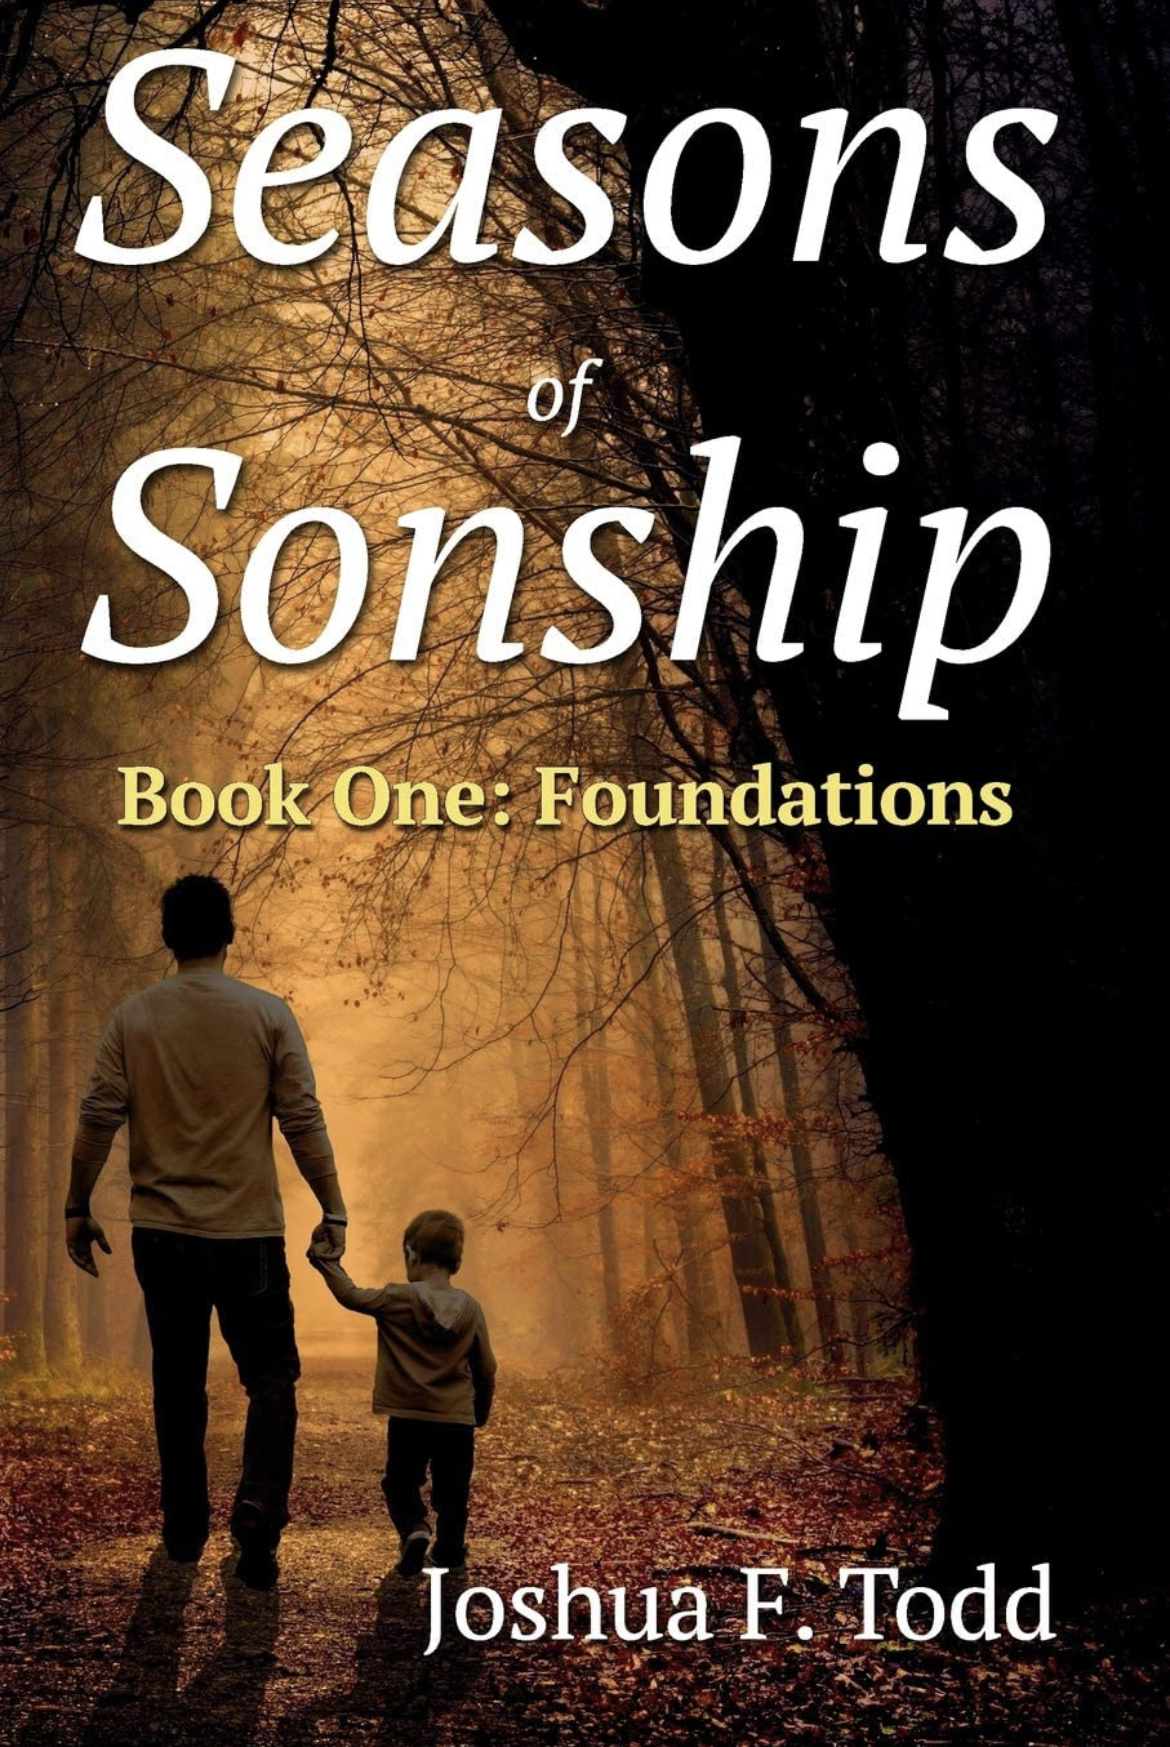 Seasons of Sonship Book 1 - Foundations